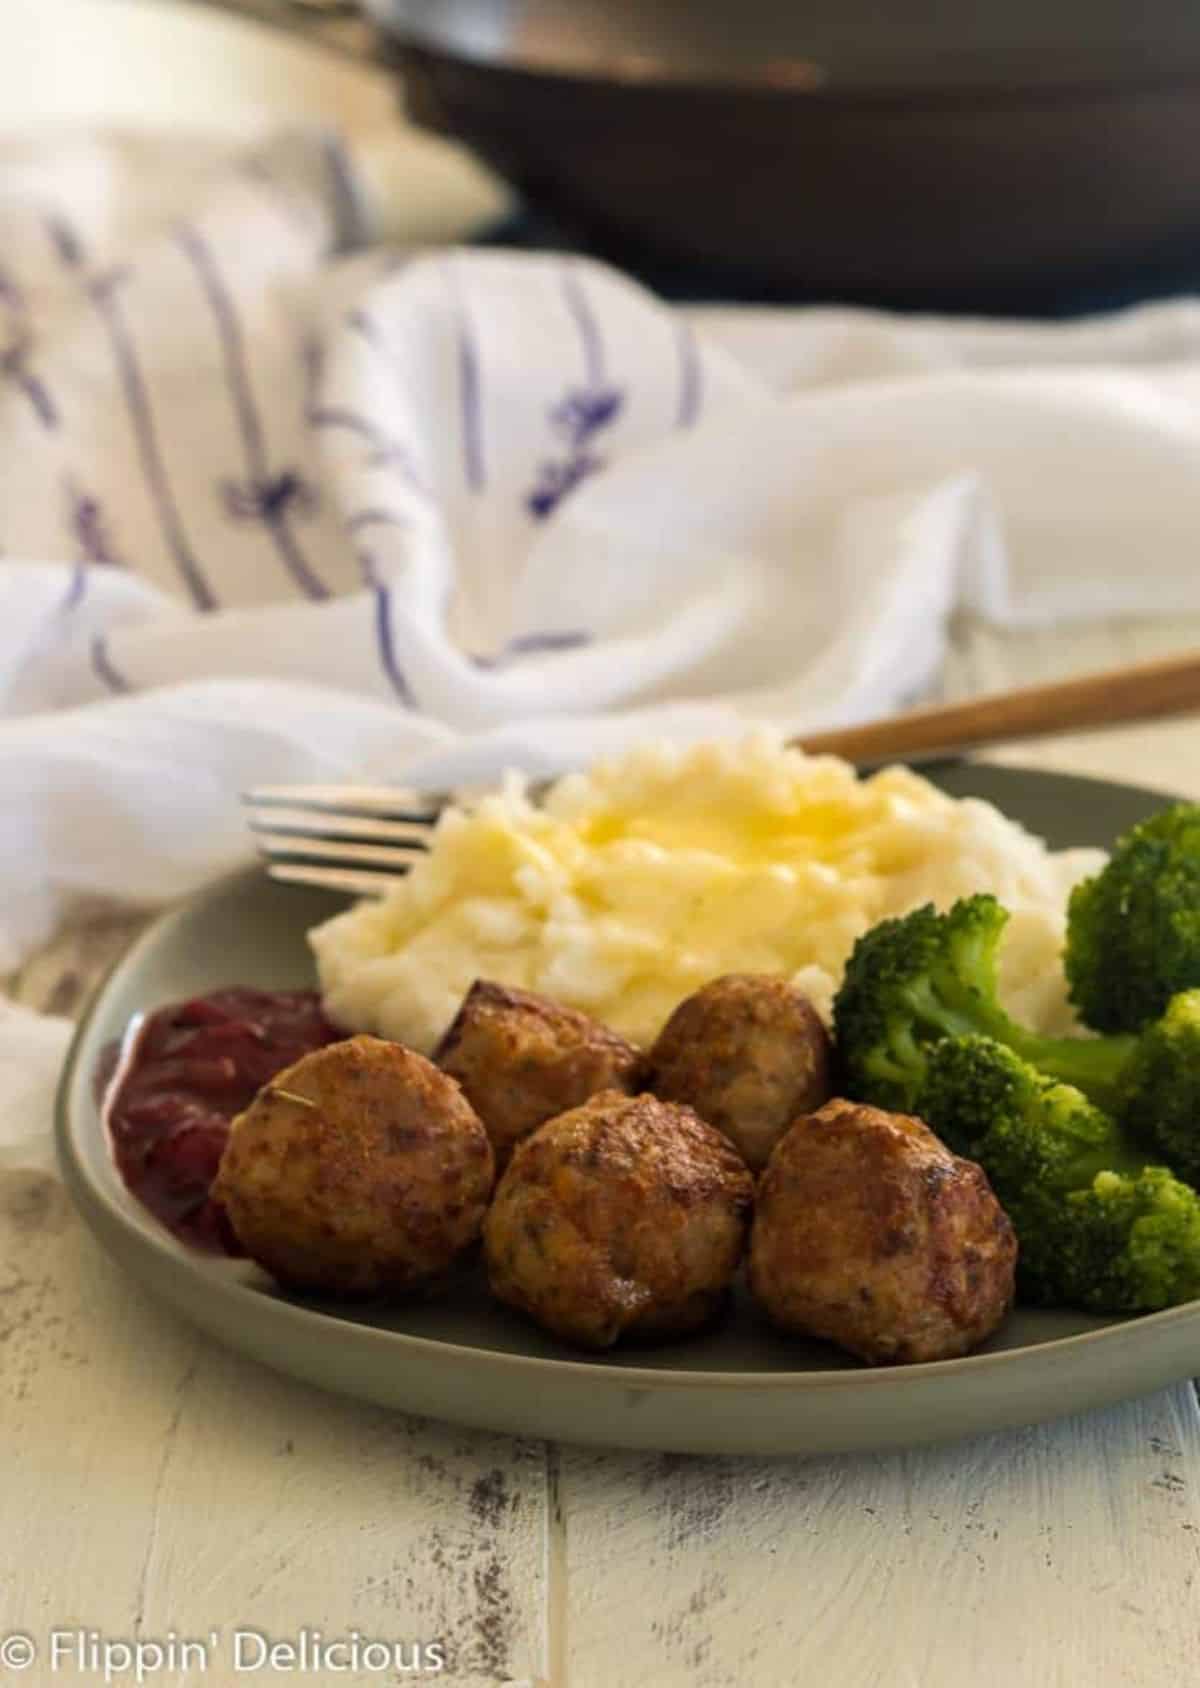 Tasty Gluten-Free Meatballs with mashed potatoes and broccoli on a gray plate.